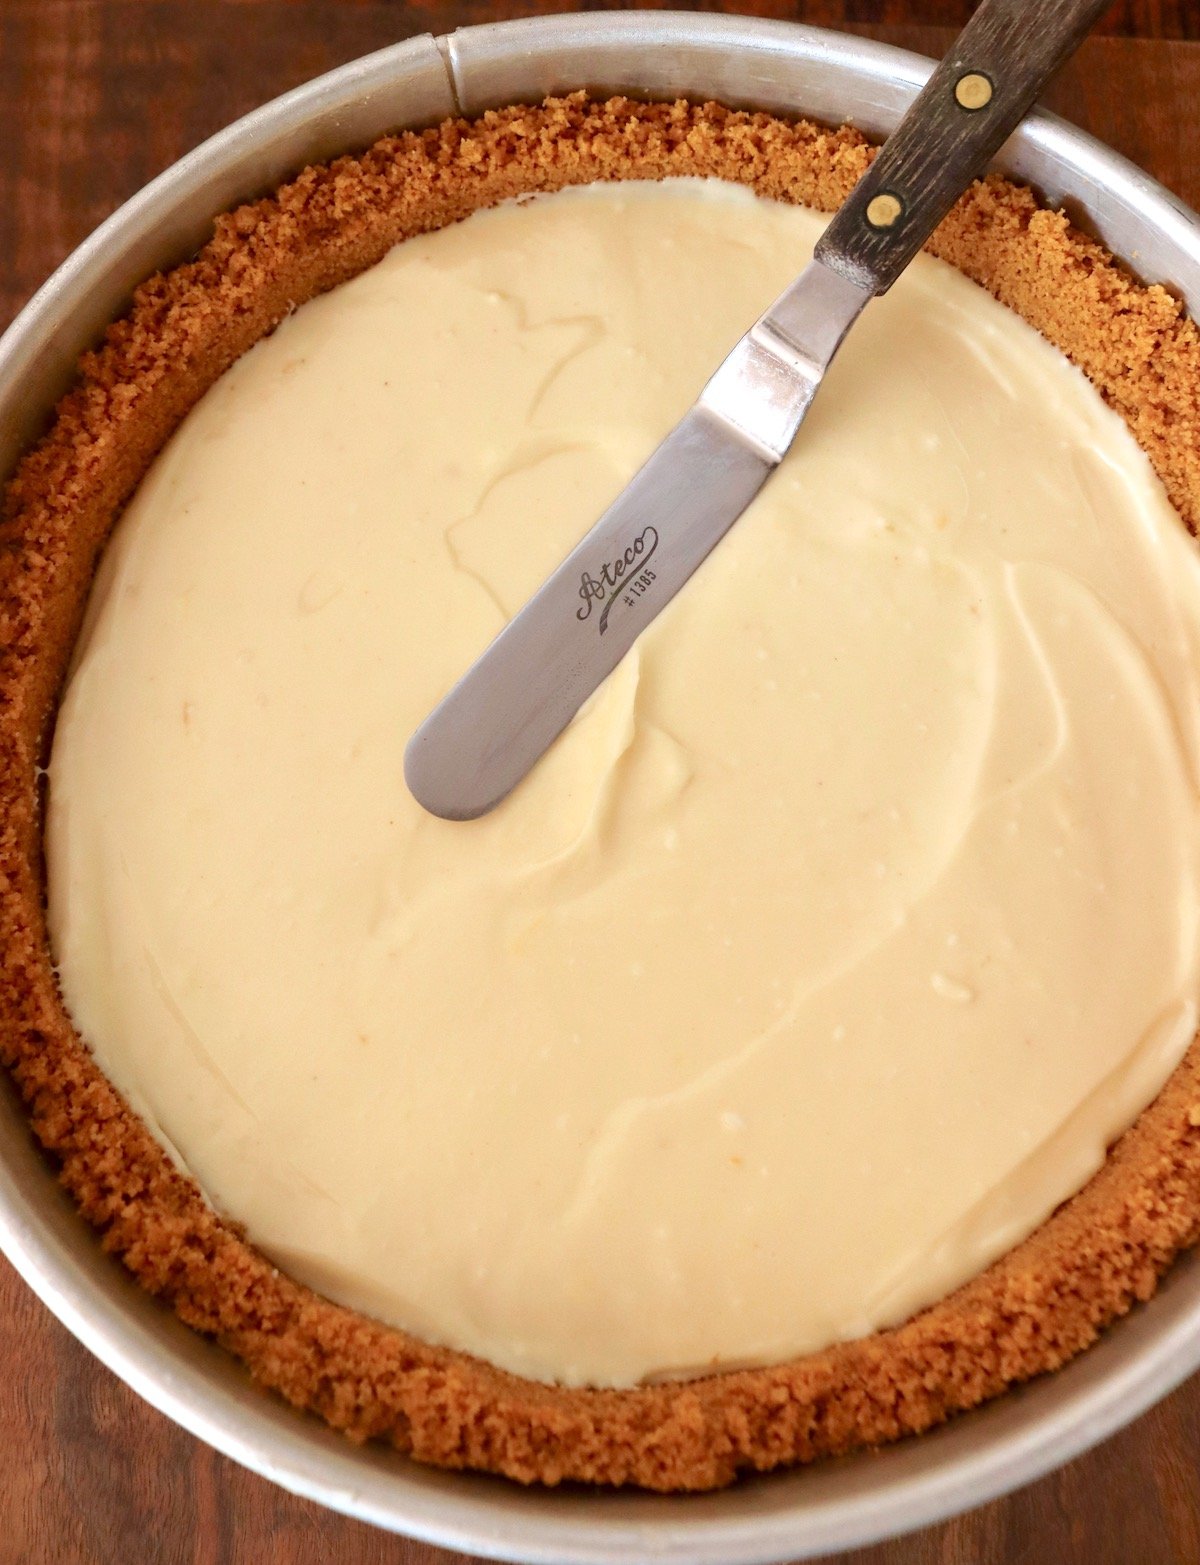 Top view of cheesecake with filling being spread smooth with small metal spatula.